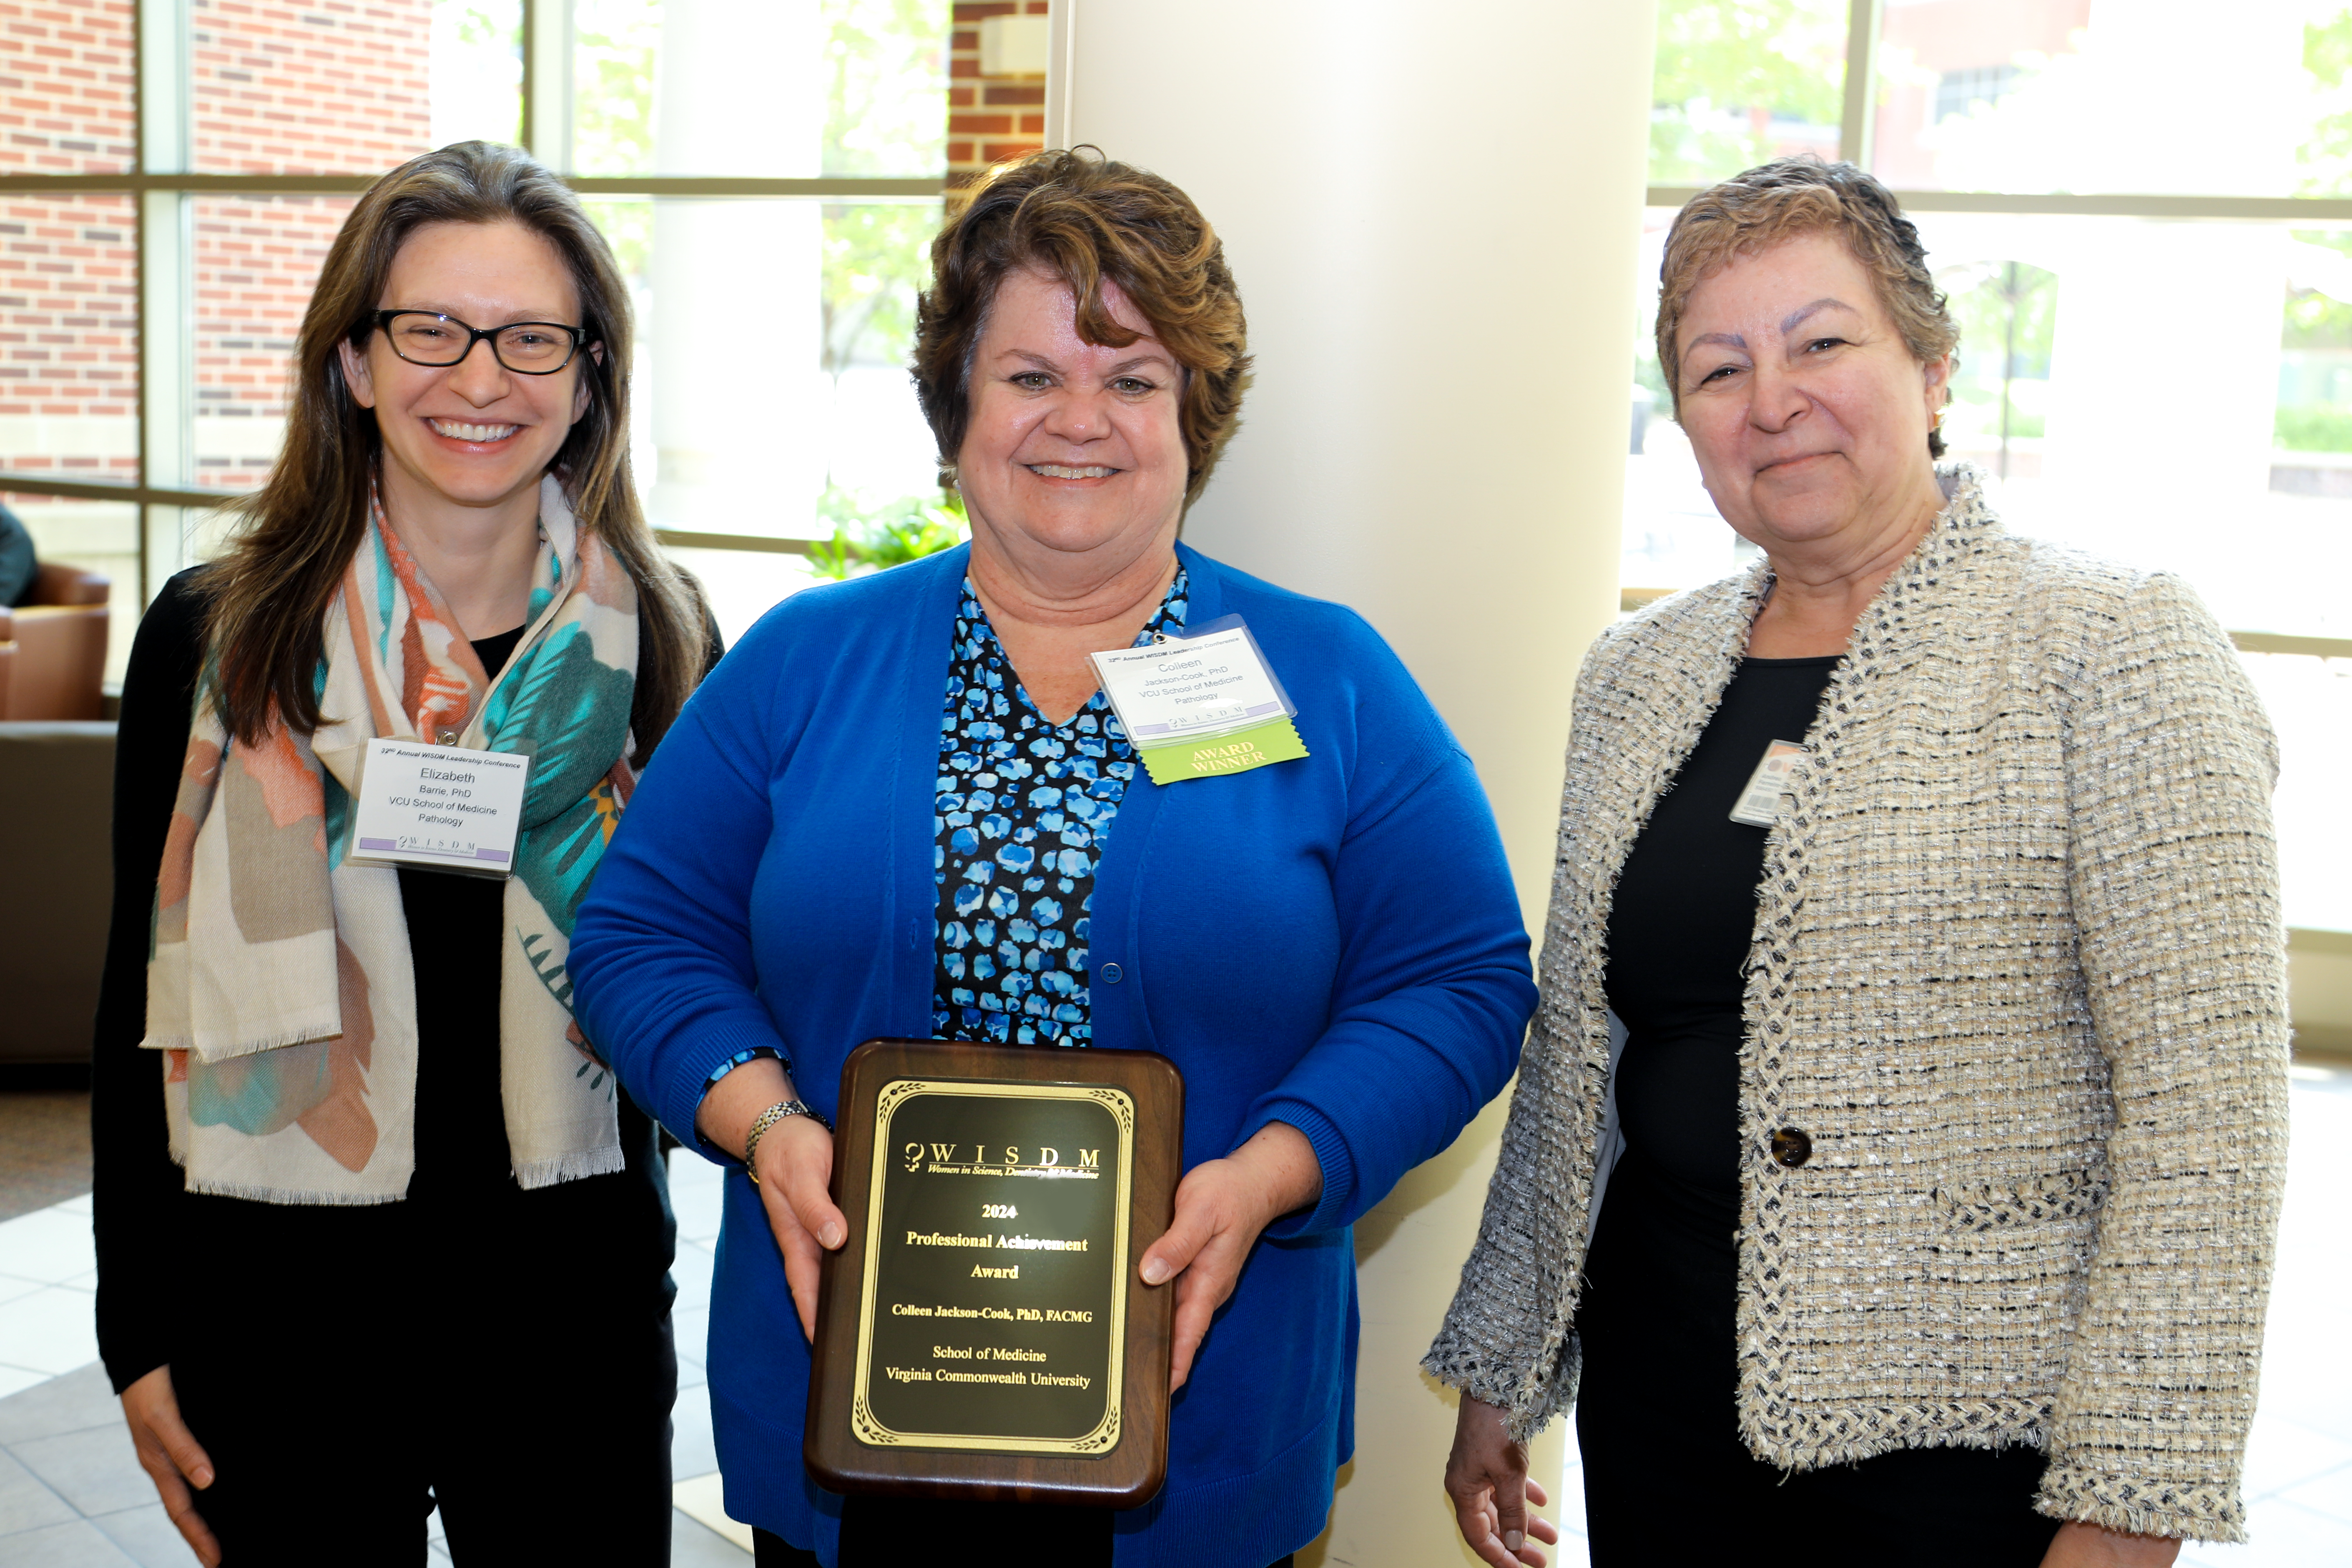 Collen Jackson-Cook, Ph.D. (center) attended the 2024 WISDM awards ceremony with Department of Pathology colleagues Elizabeth Barrie, Ph.D. (left) and Andrea Ferreira-Gonzalez, Ph.D. (right). 